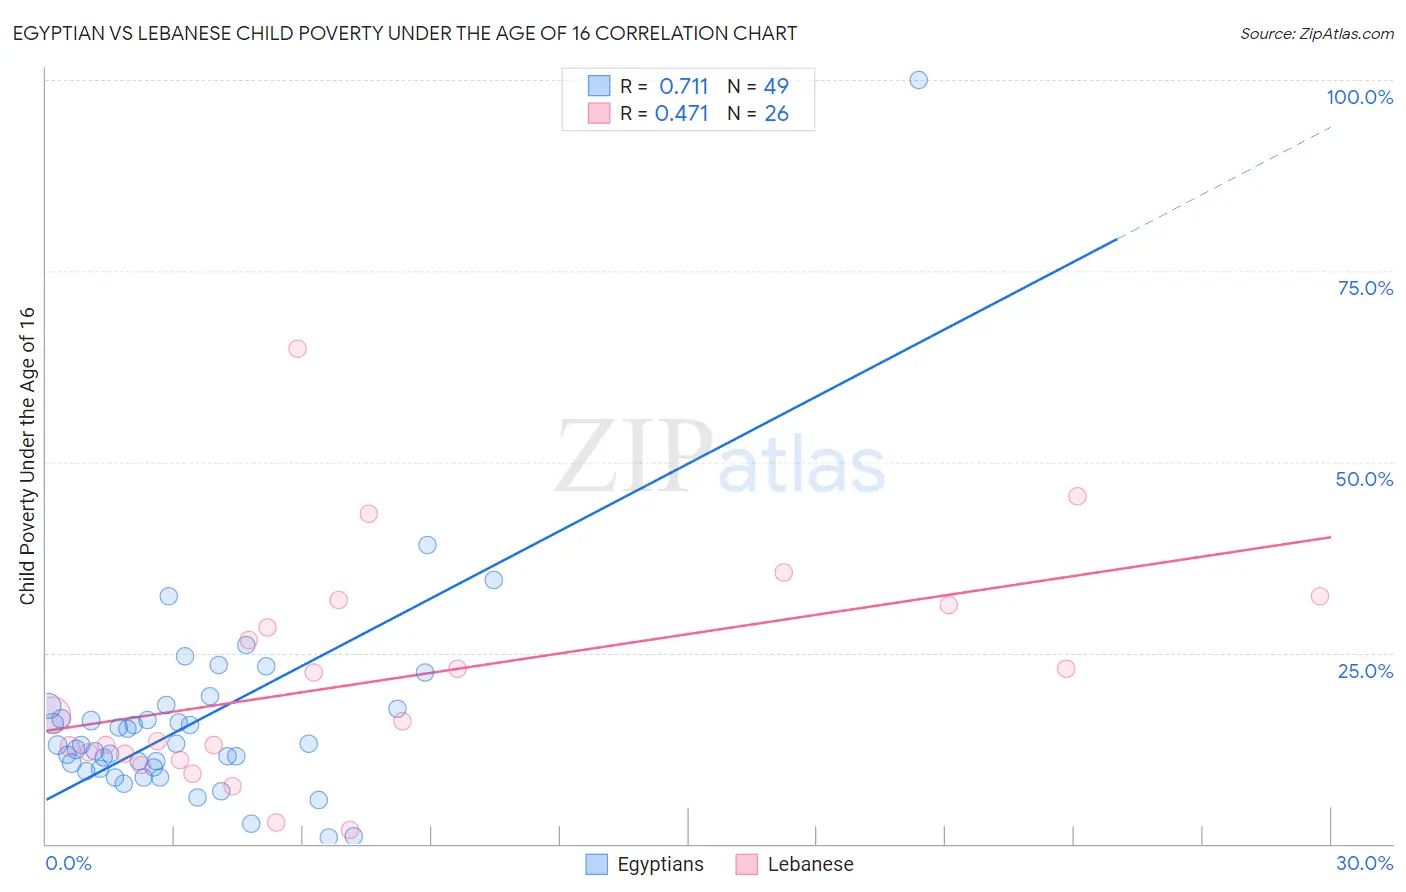 Egyptian vs Lebanese Child Poverty Under the Age of 16